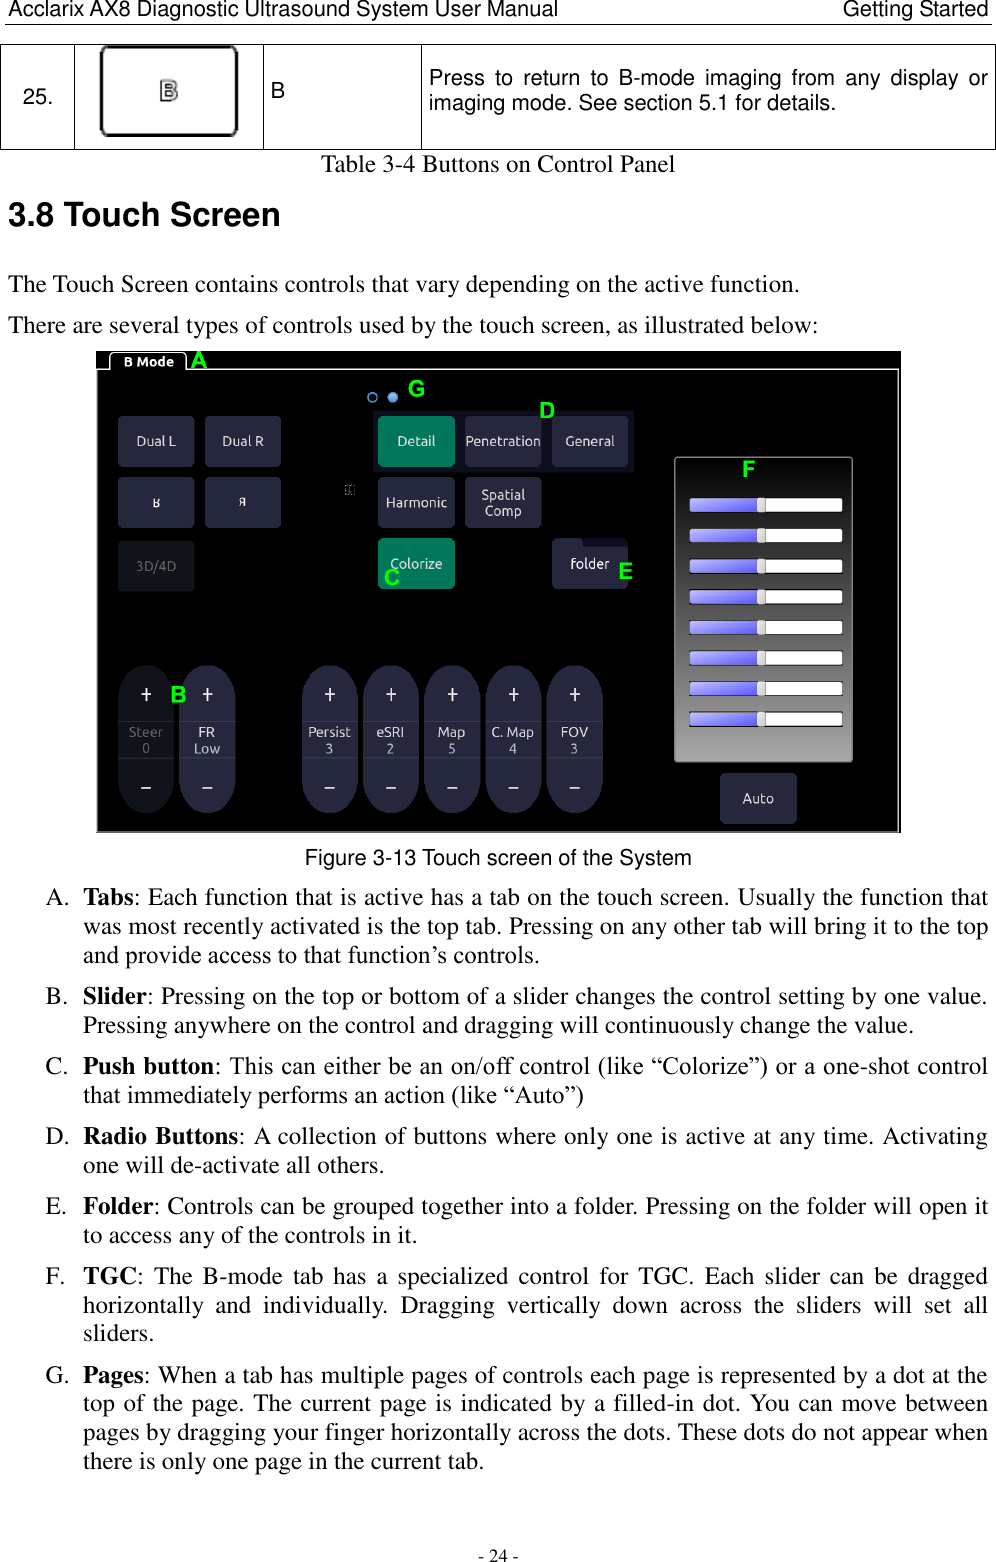 Acclarix AX8 Diagnostic Ultrasound System User Manual                                                Getting Started - 24 - 25.    B Press  to  return  to  B-mode  imaging  from  any  display  or imaging mode. See section 5.1 for details. Table 3-4 Buttons on Control Panel 3.8 Touch Screen The Touch Screen contains controls that vary depending on the active function. There are several types of controls used by the touch screen, as illustrated below:  Figure 3-13 Touch screen of the System A. Tabs: Each function that is active has a tab on the touch screen. Usually the function that was most recently activated is the top tab. Pressing on any other tab will bring it to the top and provide access to that function‟s controls. B. Slider: Pressing on the top or bottom of a slider changes the control setting by one value. Pressing anywhere on the control and dragging will continuously change the value. C. Push button: This can either be an on/off control (like “Colorize”) or a one-shot control that immediately performs an action (like “Auto”)   D. Radio Buttons: A collection of buttons where only one is active at any time. Activating one will de-activate all others. E. Folder: Controls can be grouped together into a folder. Pressing on the folder will open it to access any of the controls in it. F. TGC:  The B-mode  tab has  a specialized  control  for  TGC.  Each  slider can be  dragged horizontally  and  individually.  Dragging  vertically  down  across  the  sliders  will  set  all sliders.   G. Pages: When a tab has multiple pages of controls each page is represented by a dot at the top of the page. The current page is indicated by a filled-in dot. You can move between pages by dragging your finger horizontally across the dots. These dots do not appear when there is only one page in the current tab.    